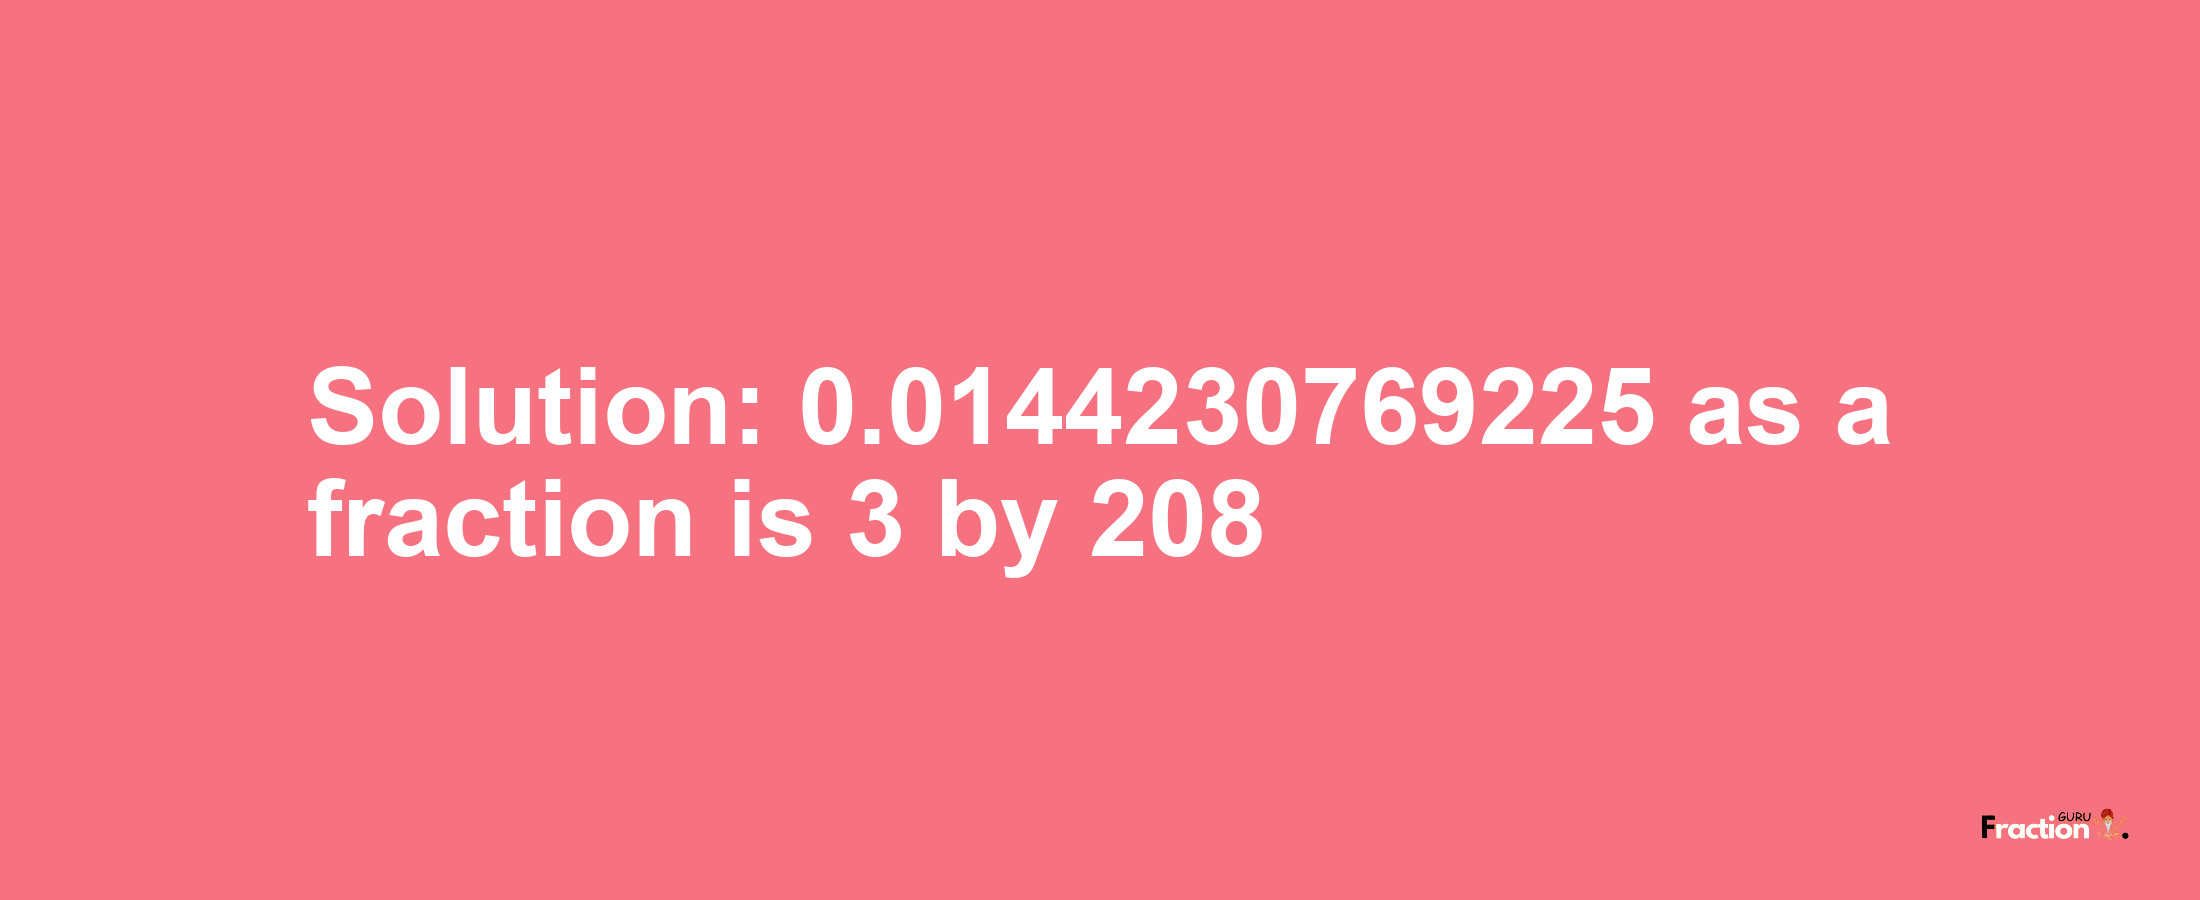 Solution:0.0144230769225 as a fraction is 3/208